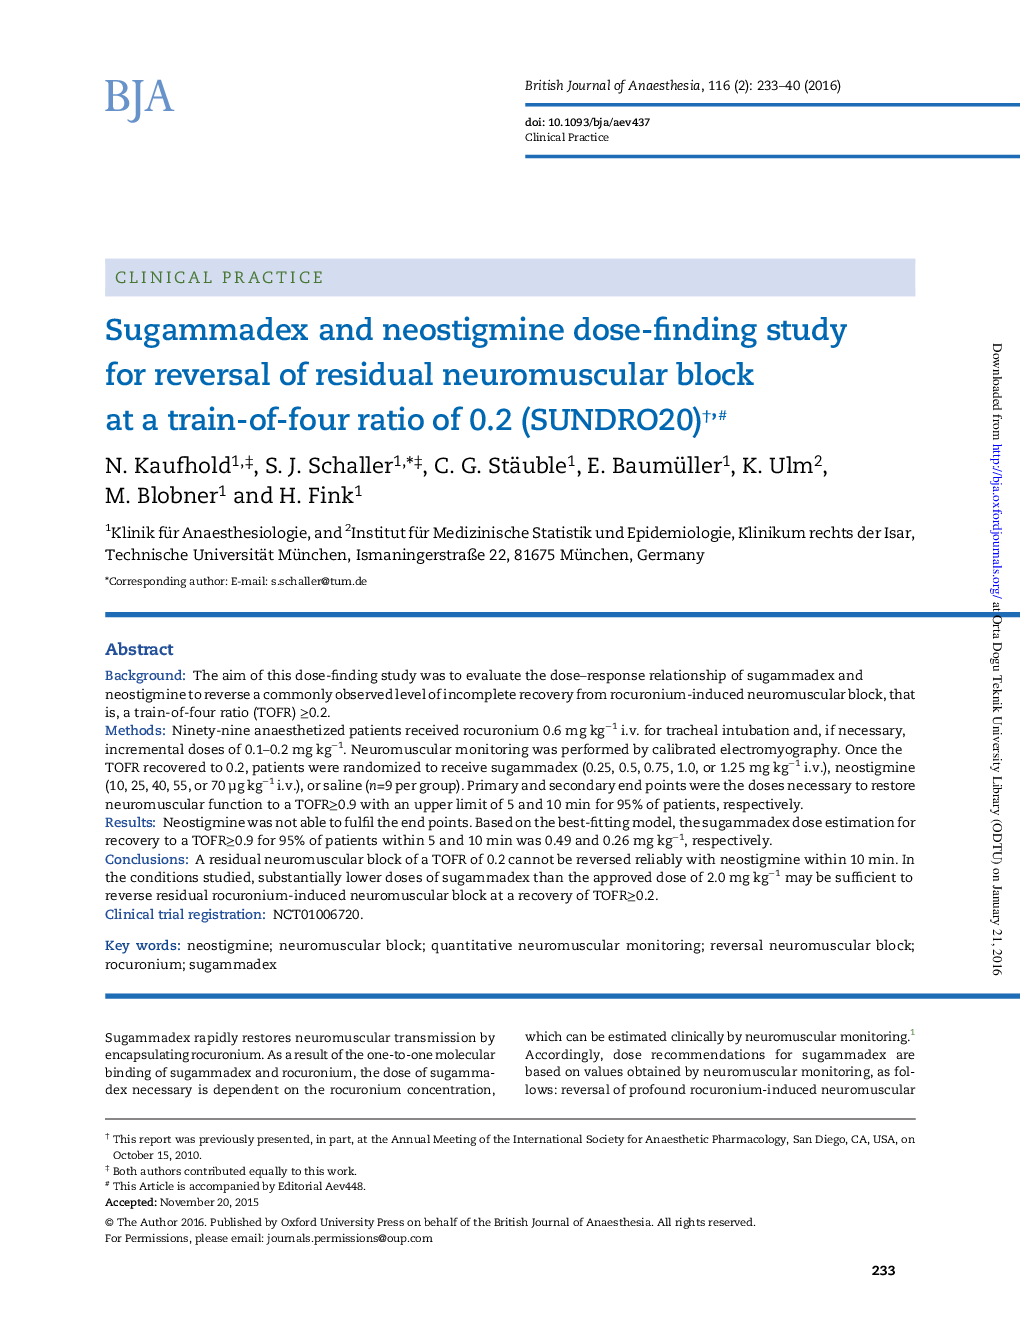 Sugammadex and neostigmine dose-finding study for reversal of residual neuromuscular block at a train-of-four ratio of 0.2 (SUNDRO20)â ,#